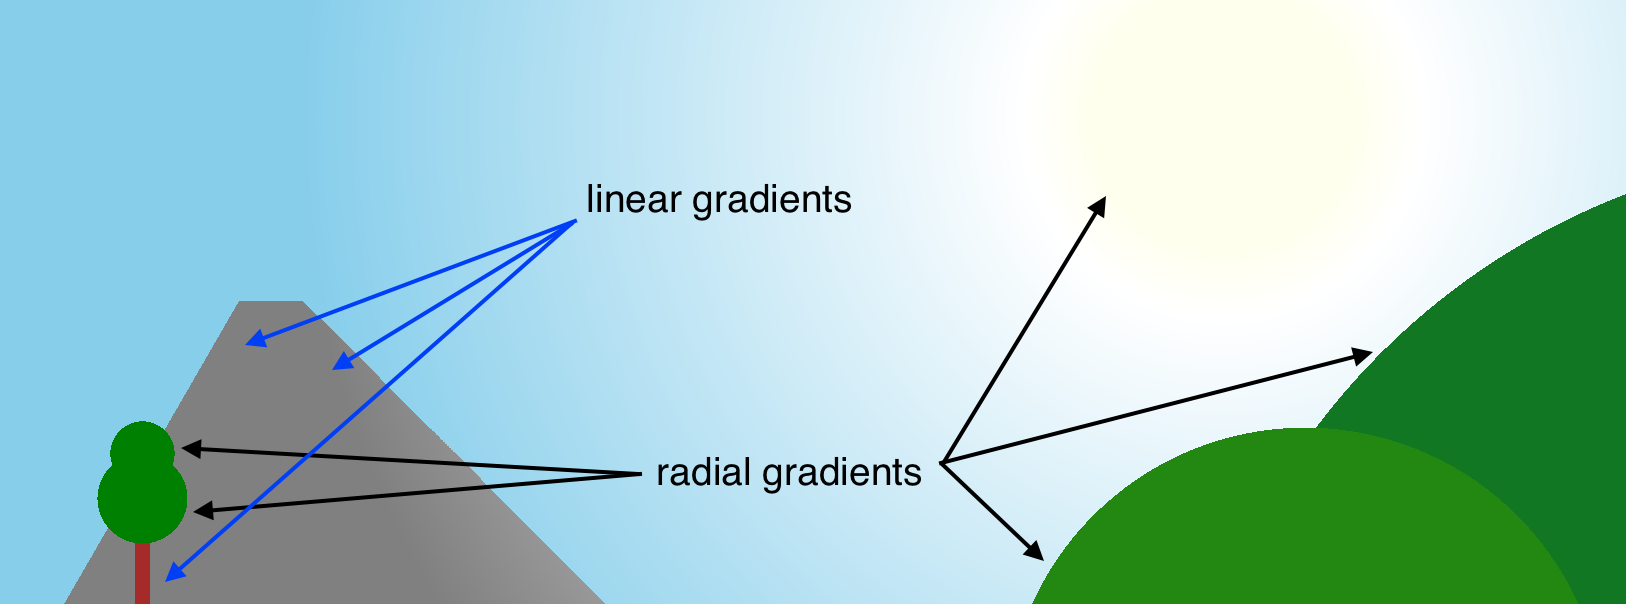 Screenshot of the sky in the game with the word linear-gradient with arrows pointing to a mountain and a tree trunk; and the word radial-gradient with arrows pointing to the sun, some rounded mountains, and the treetop.